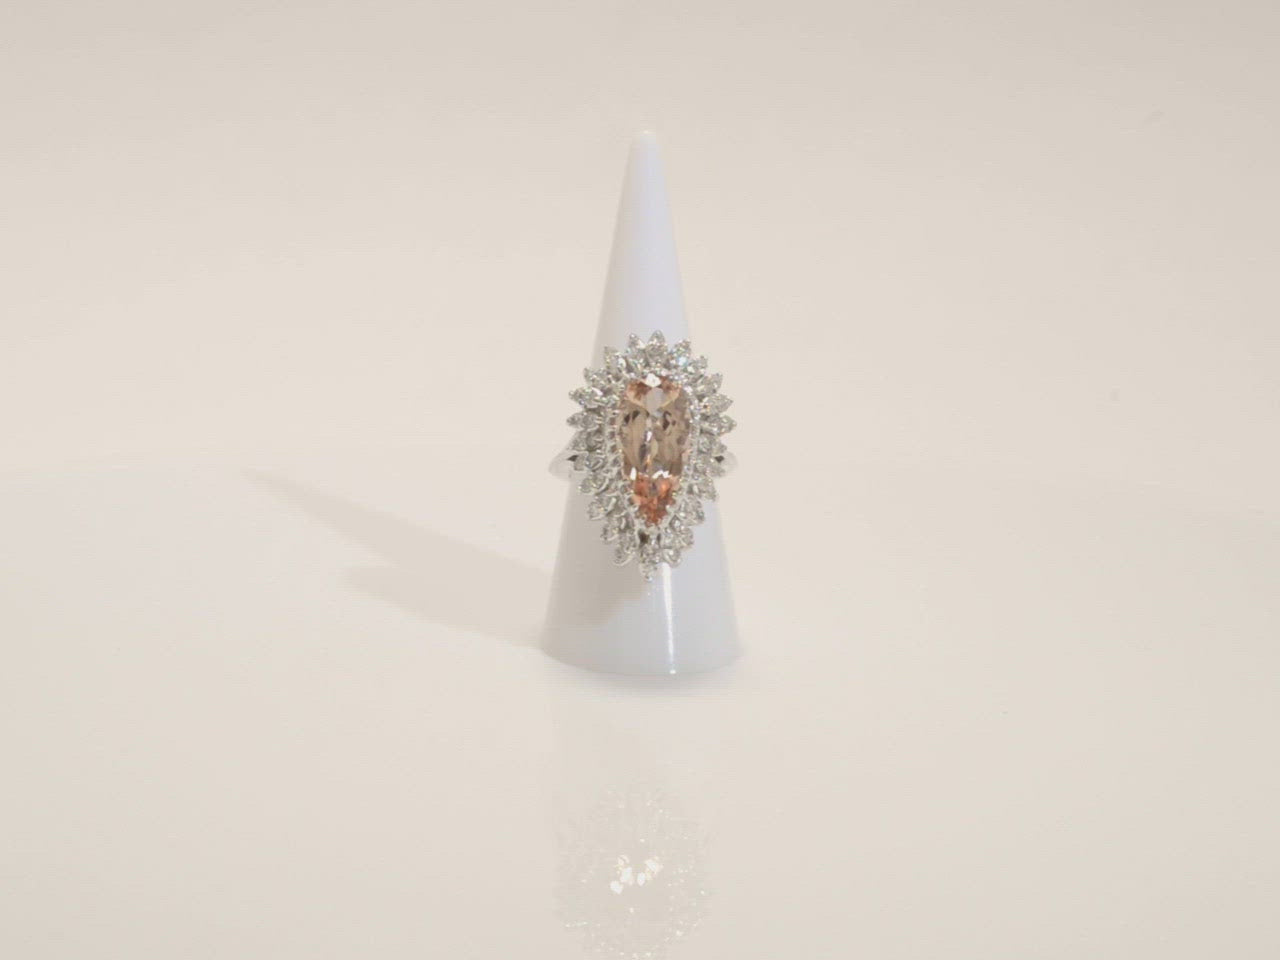 A unique five carat pear cut morganite is set in a large 14k white gold ballerina ring.